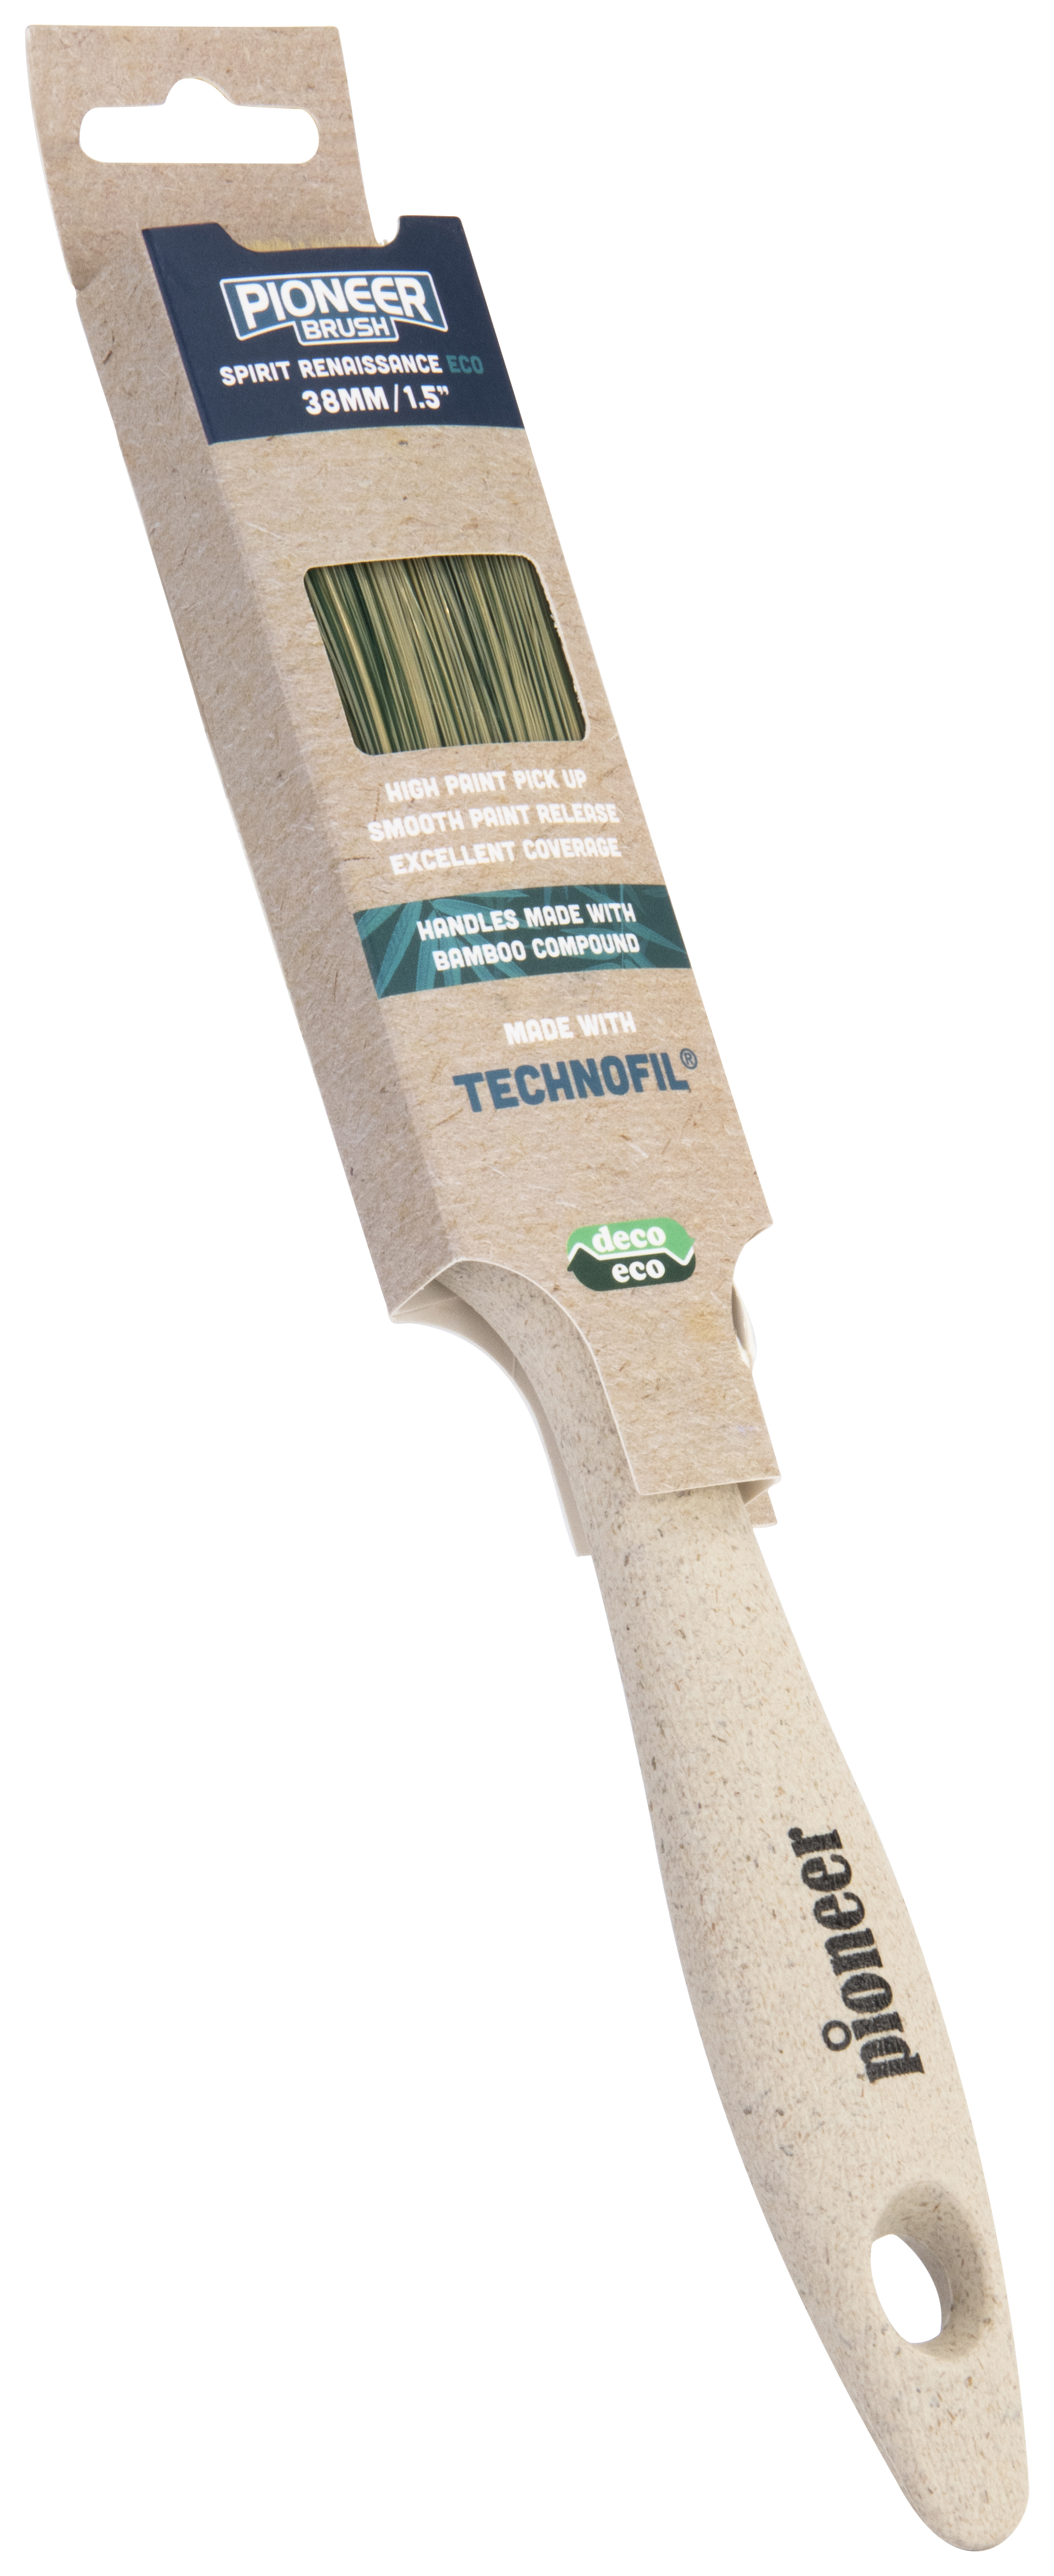 Image of Pioneer Eco Paint Brush - 1.5in